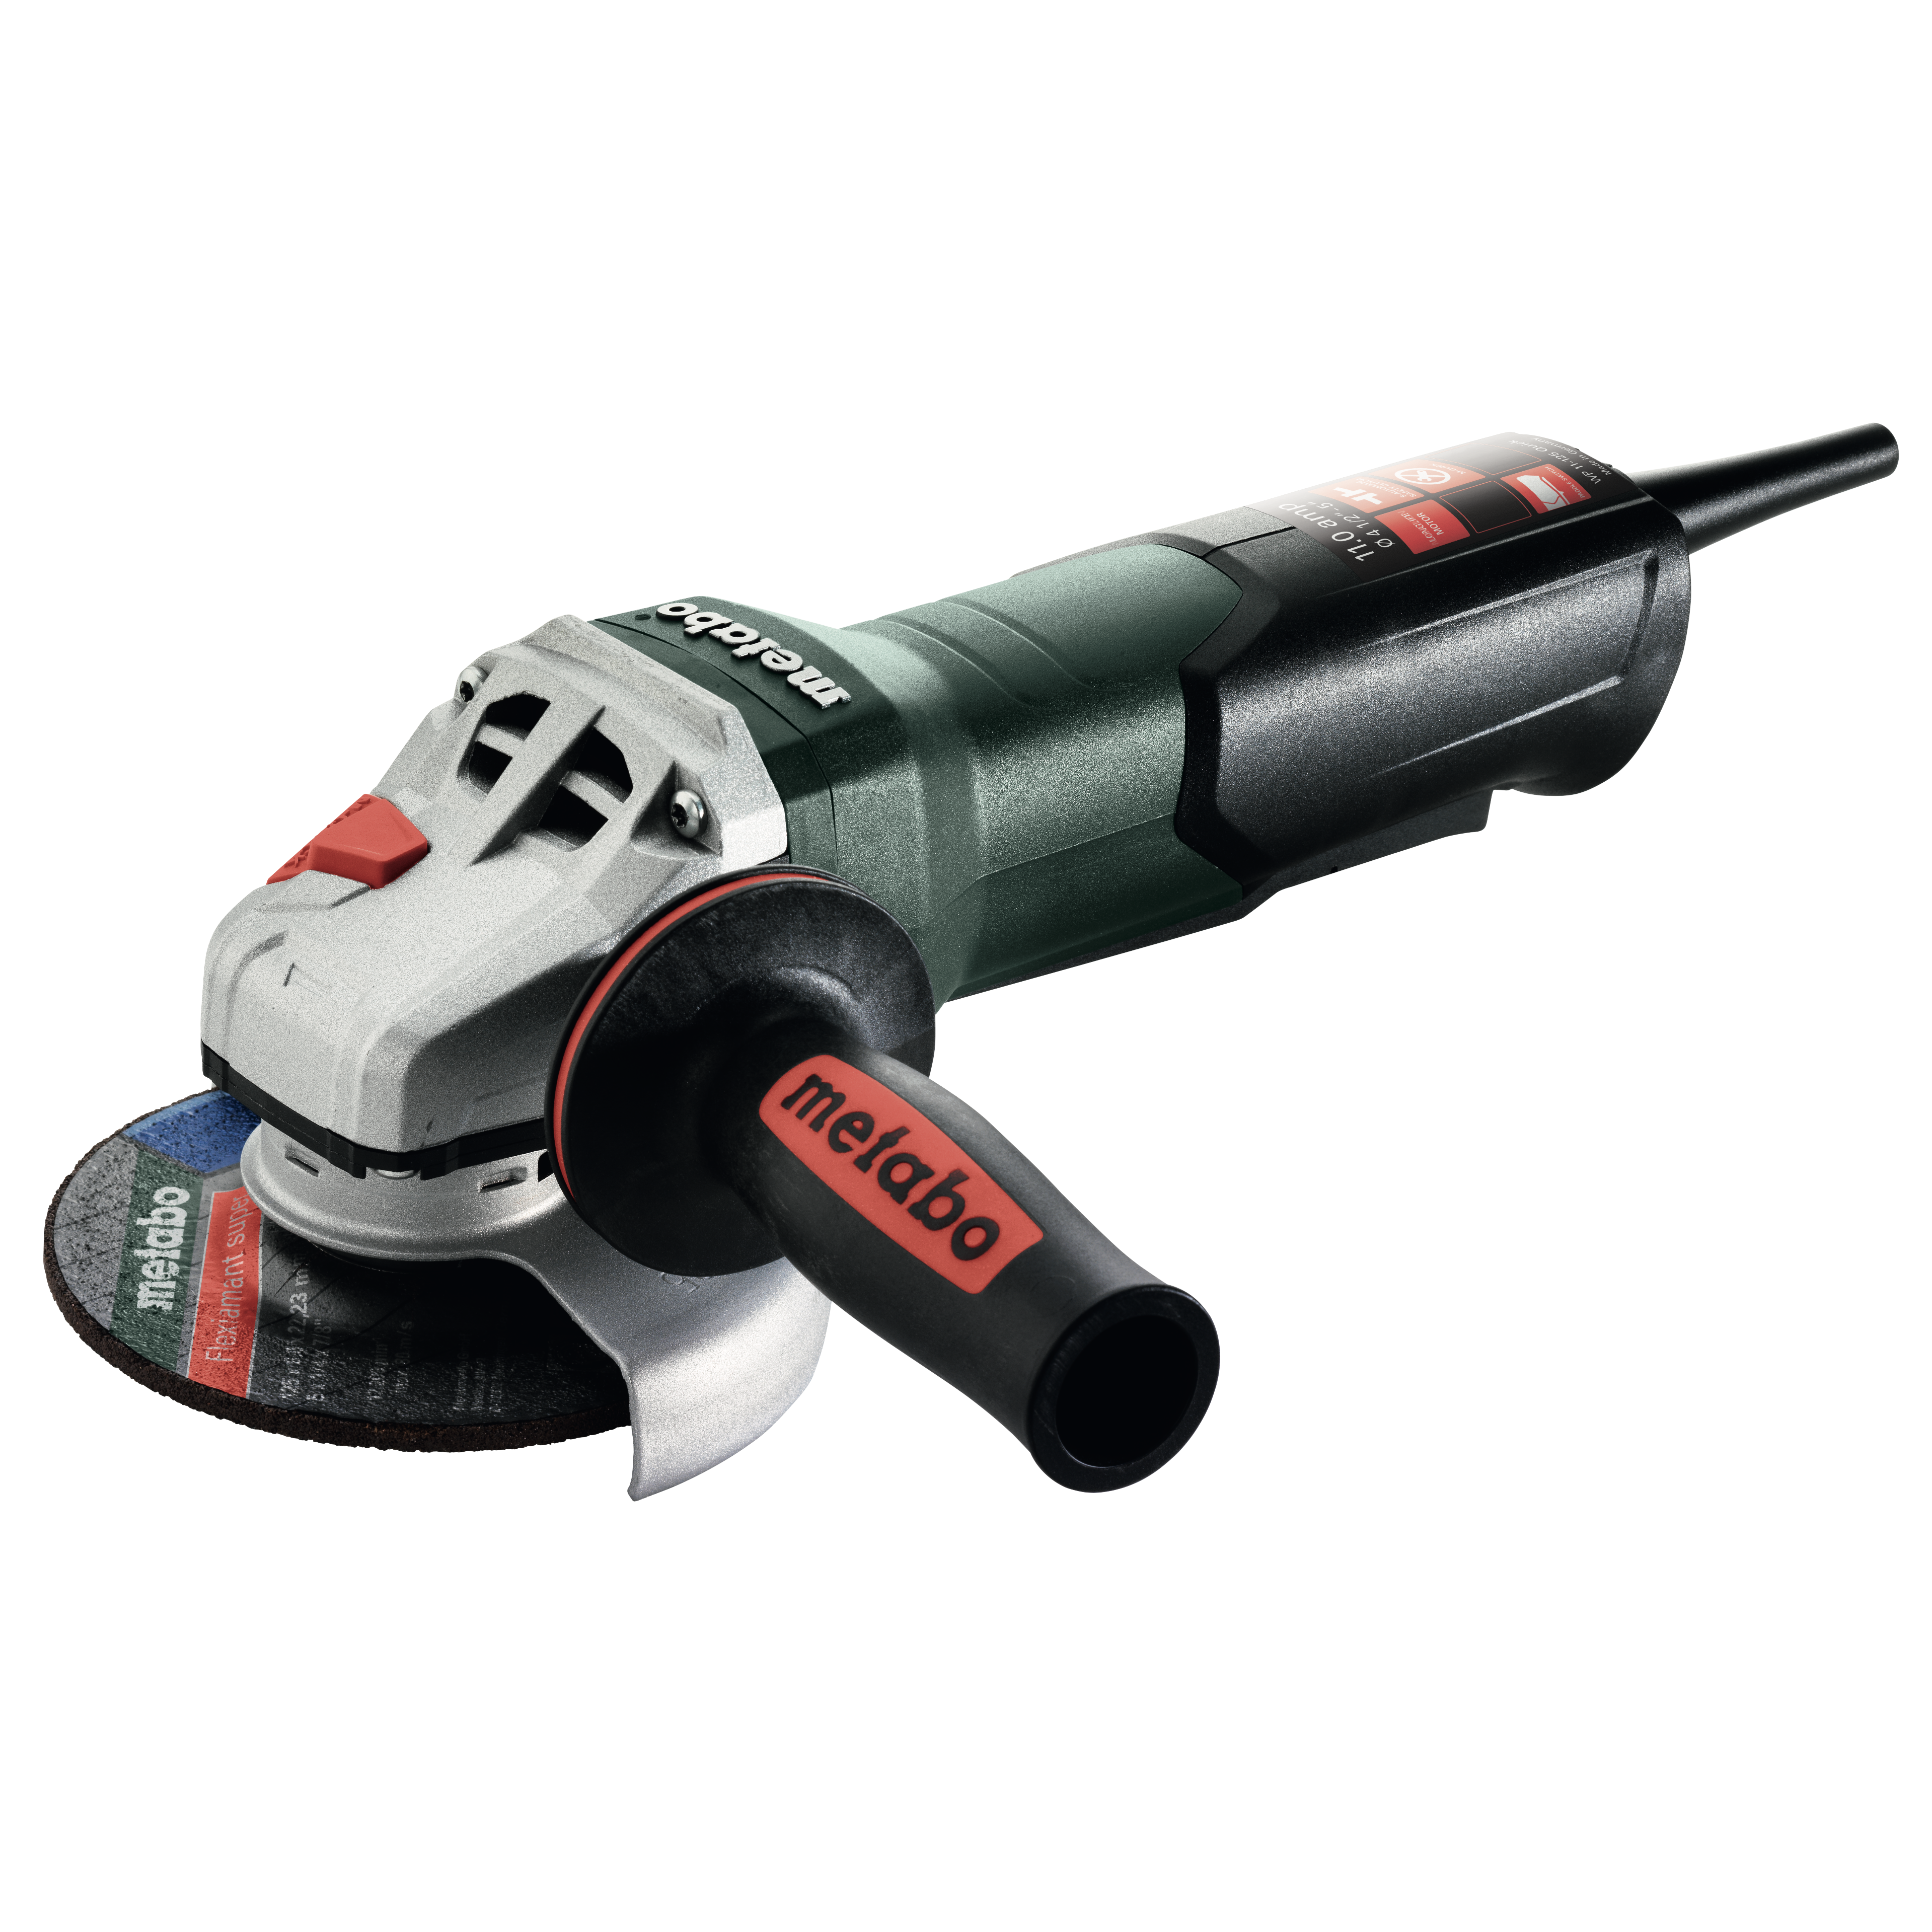 Metabo WP 11-125 5" Quick Angle Grinder - 603624420